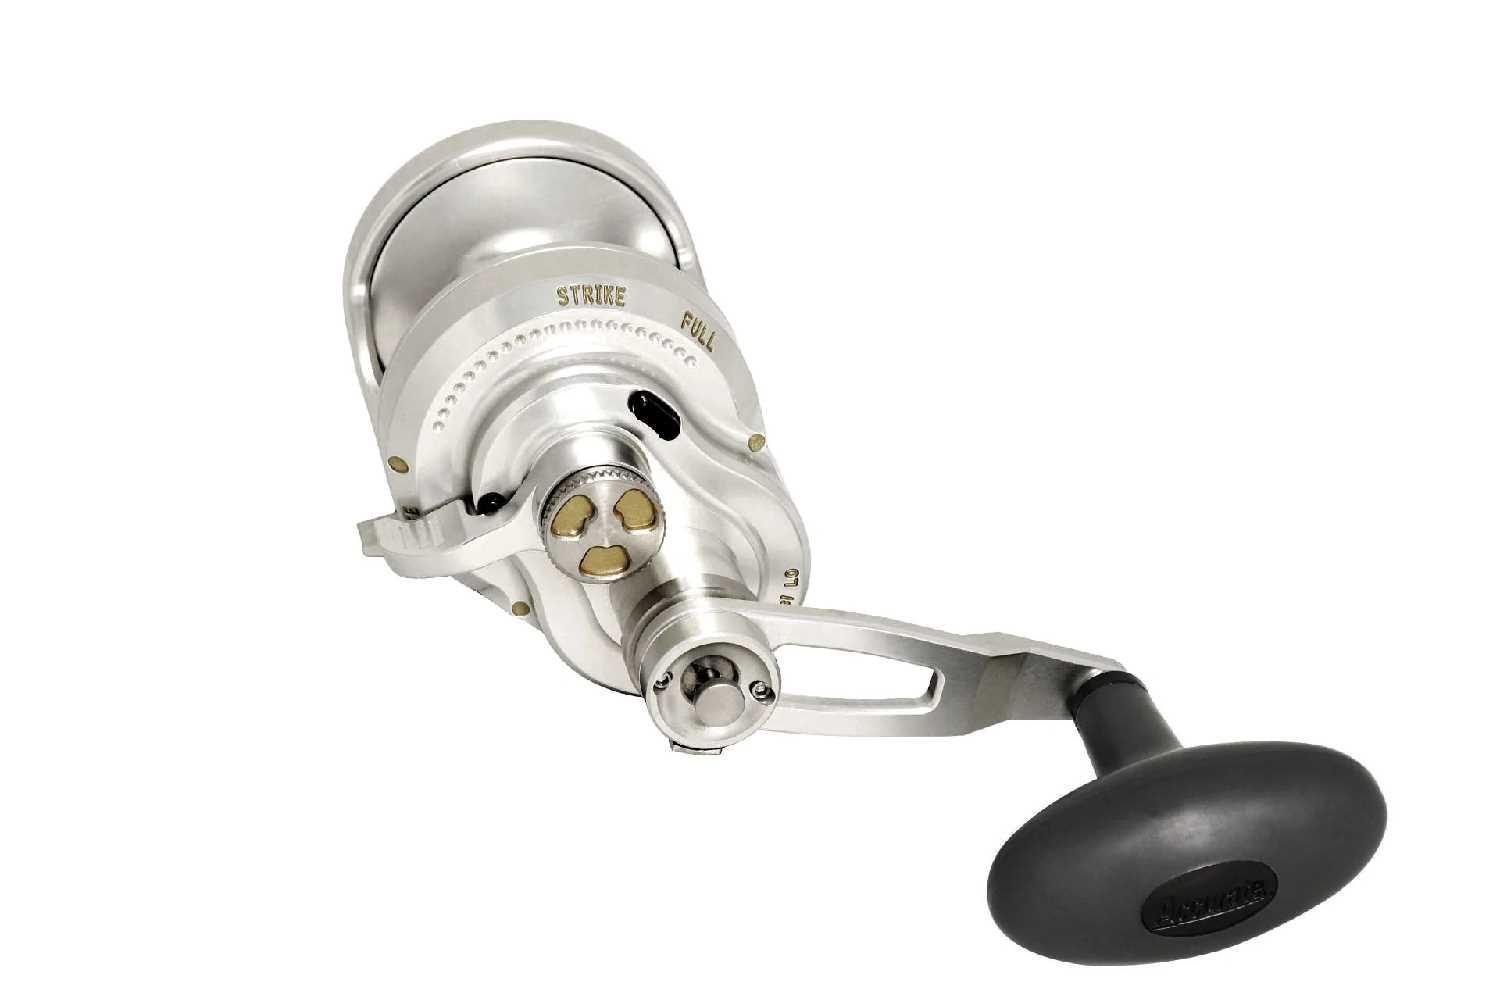 Accurate Boss Fury FX2-500 2-Speed Conventional Reel